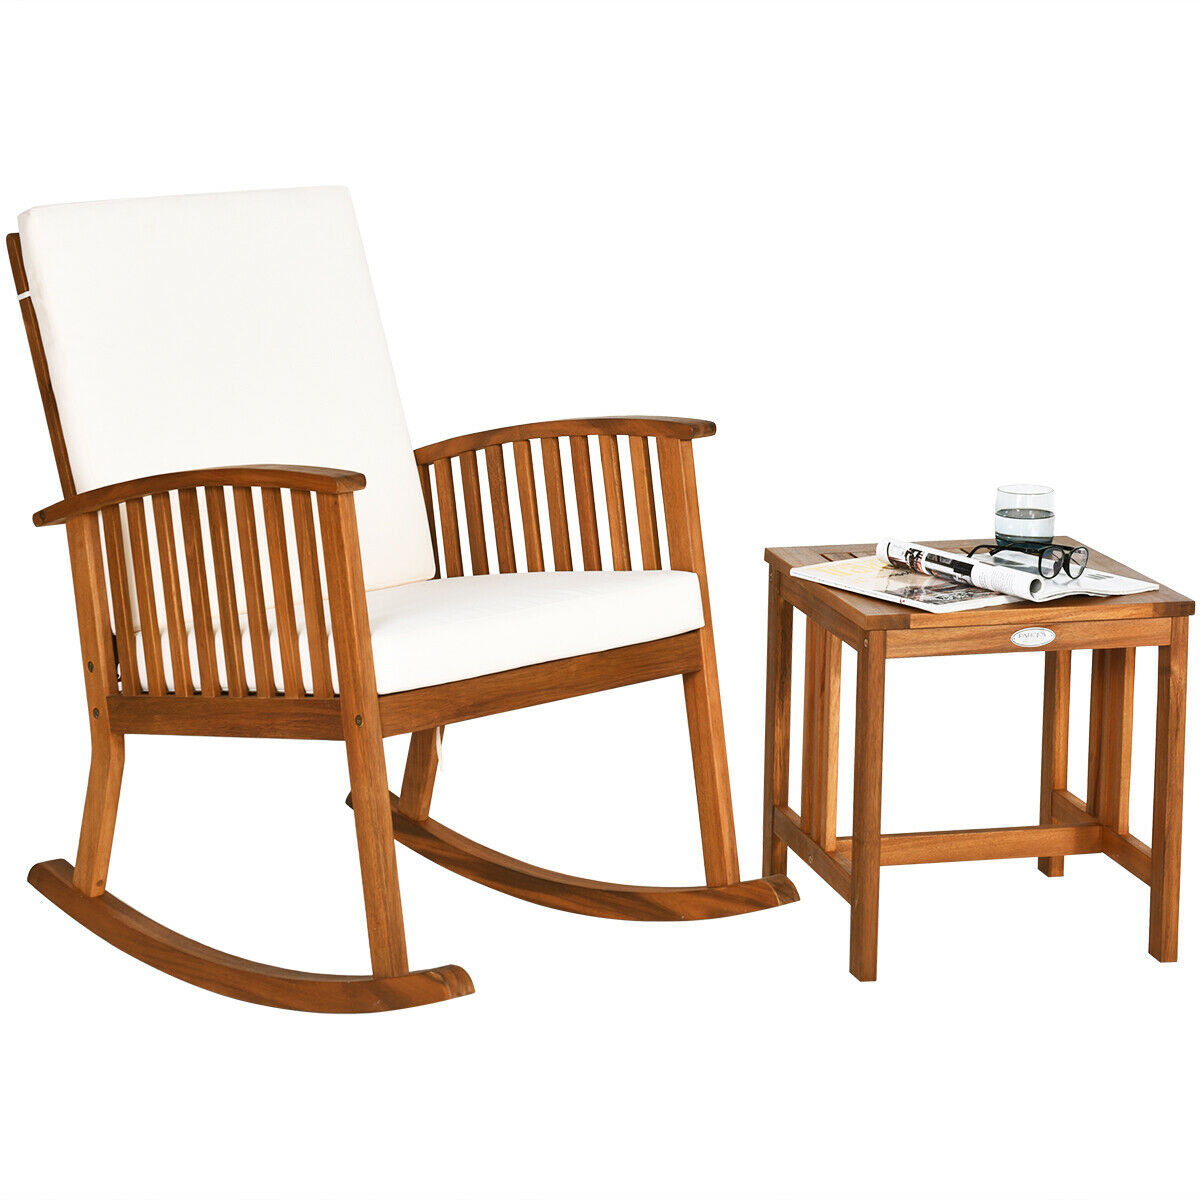 Outdoor Rocking Chair and Side Table - Wood Patio Chair with Cushion - Brown - image 1 of 10